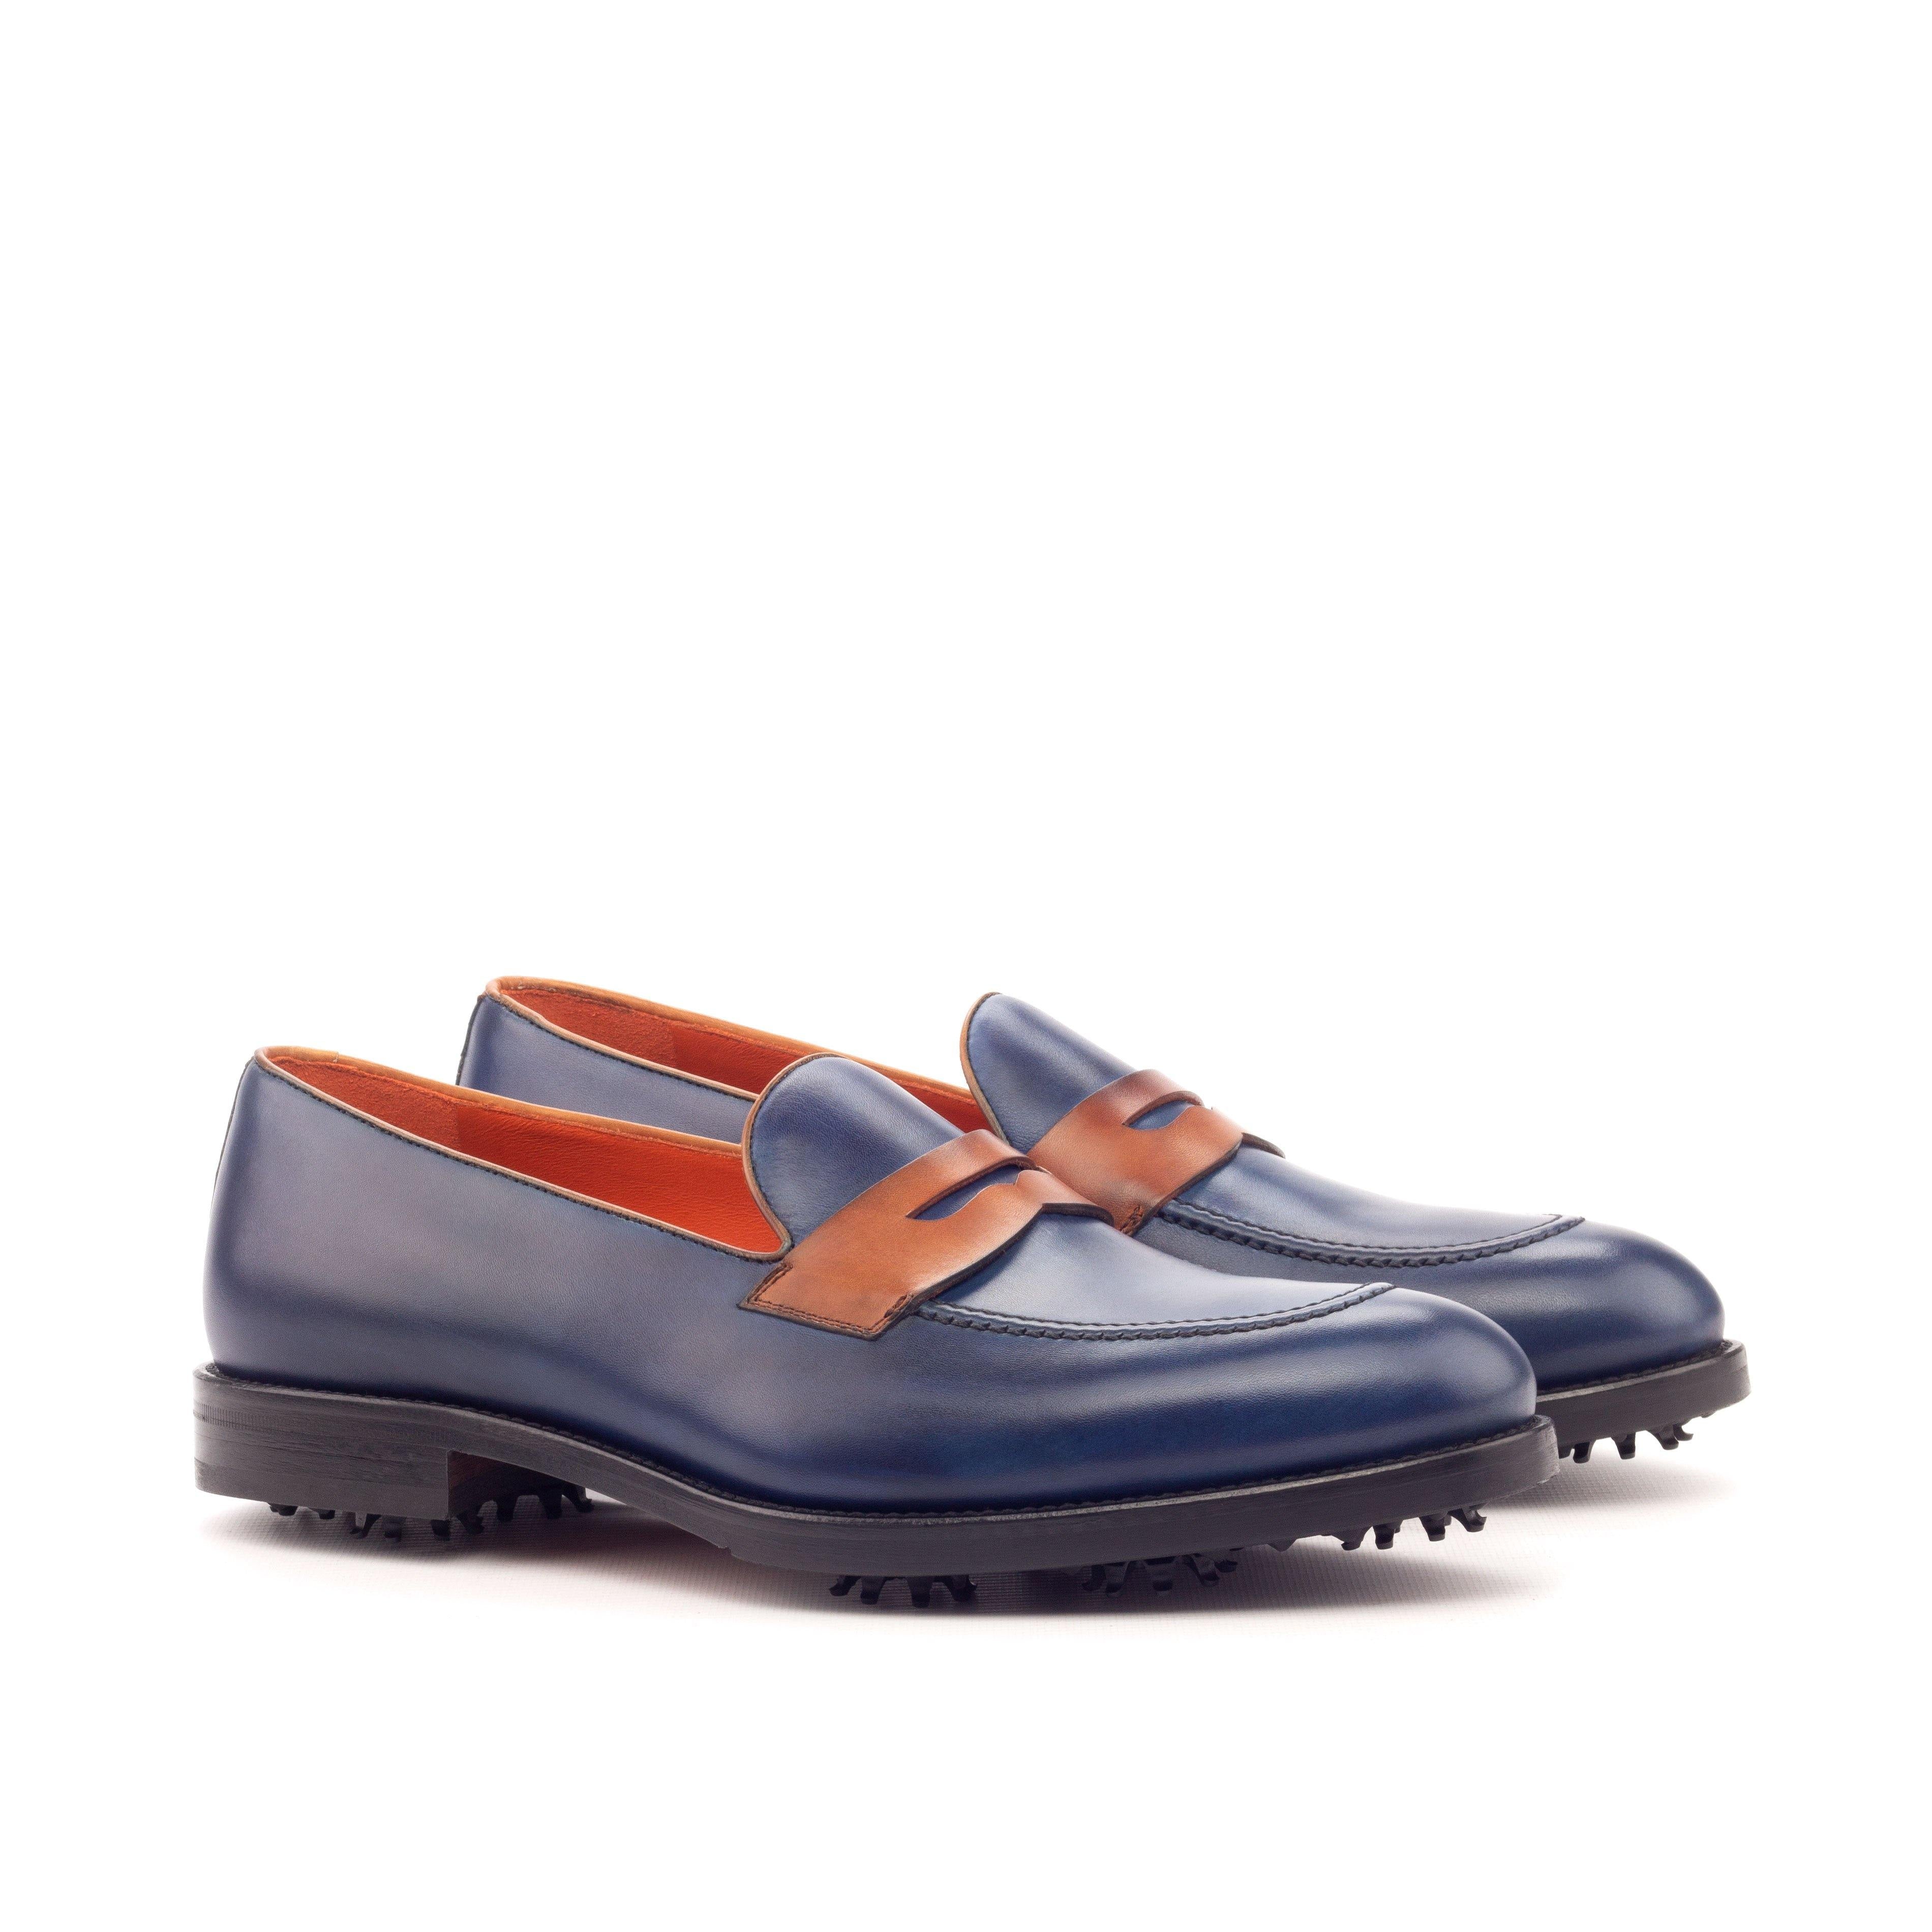 Double Eagle Loafer Golf Shoes